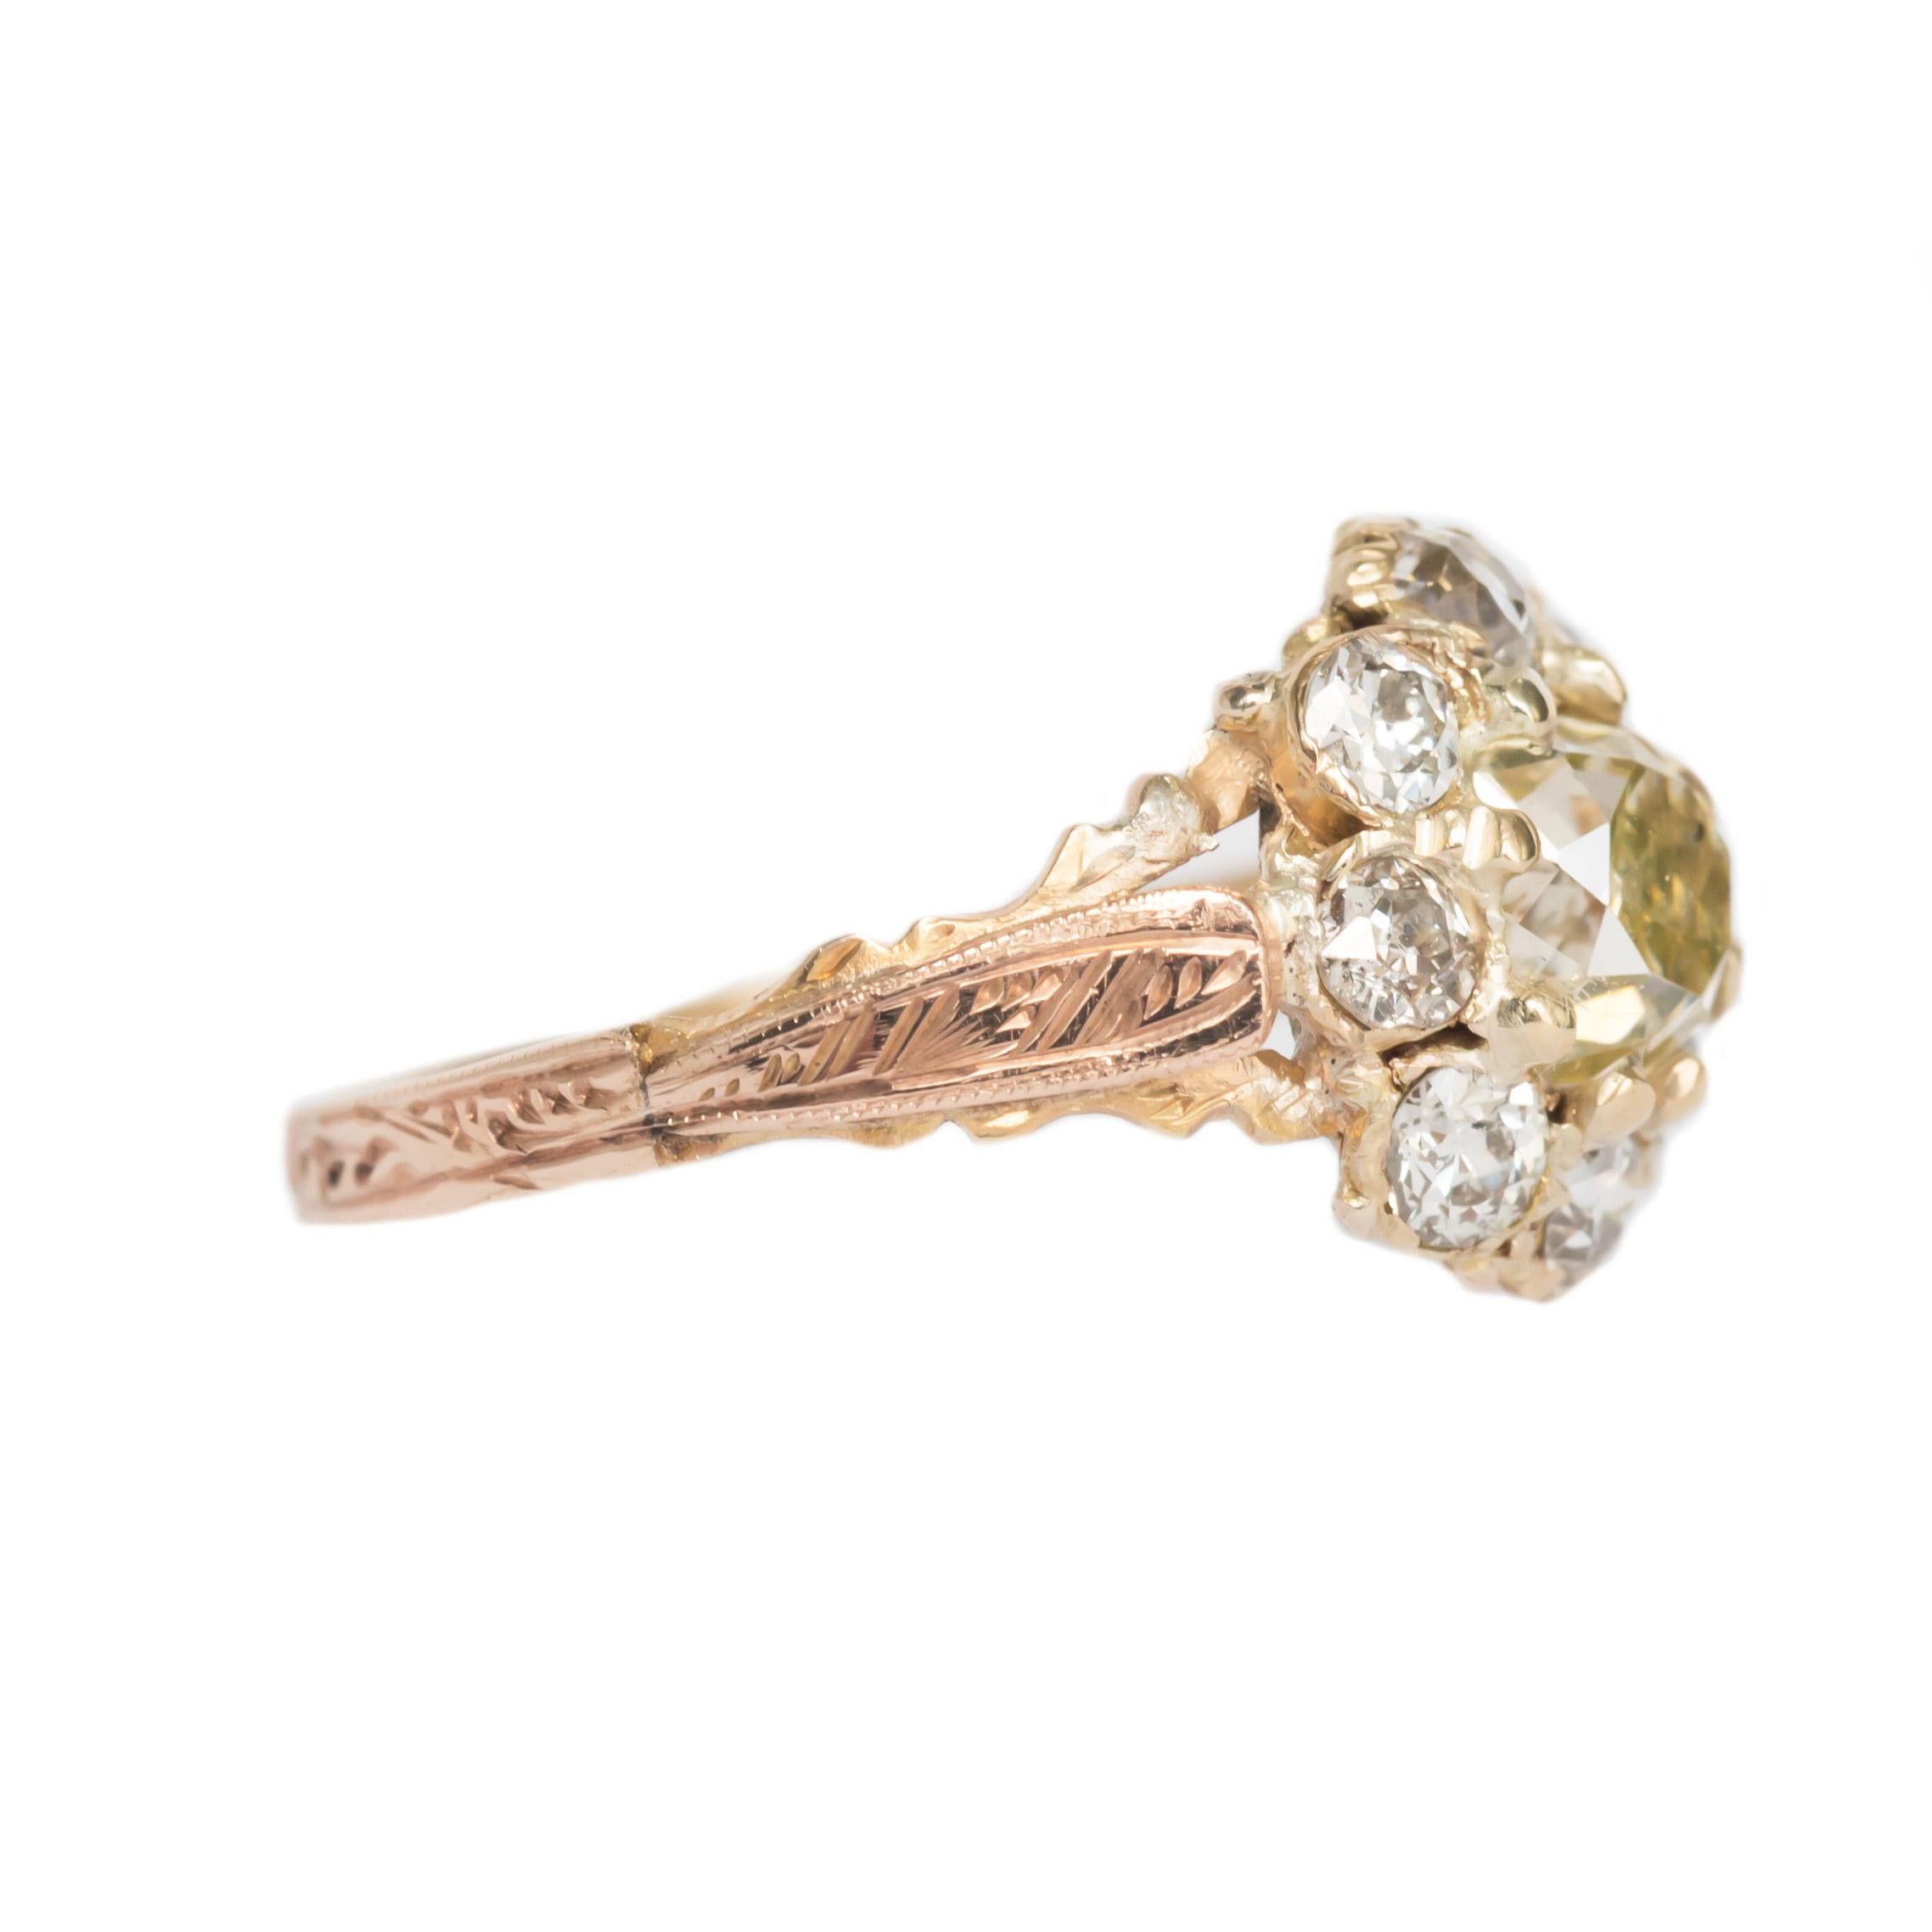 Ring Size: 7
Metal Type: 9 karat Yellow Gold (English Hallmarks)
Weight: 1.6 grams

Center Diamond Details
Shape: Antique Cushion 
Carat Weight: .85 carat
Color: Fancy Yellow 
Clarity: SI1

Side Stone Details: 
Shape: Old European Brilliant 
Total